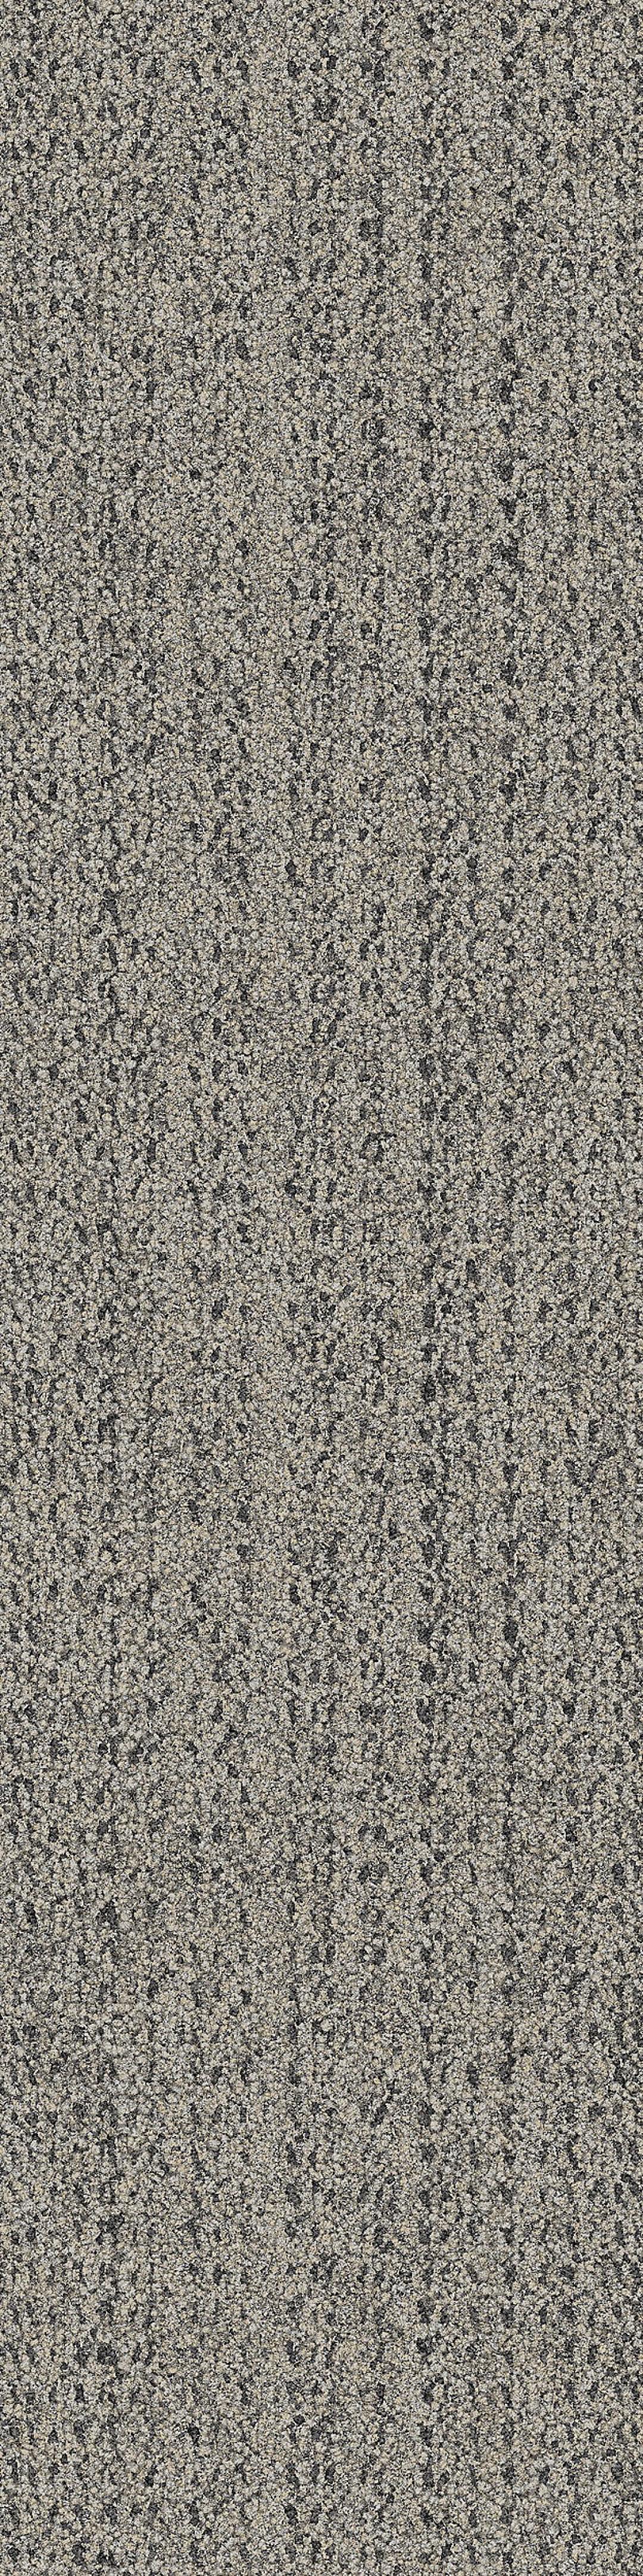 World Woven - Ww870 - Natural Weft from Inzide